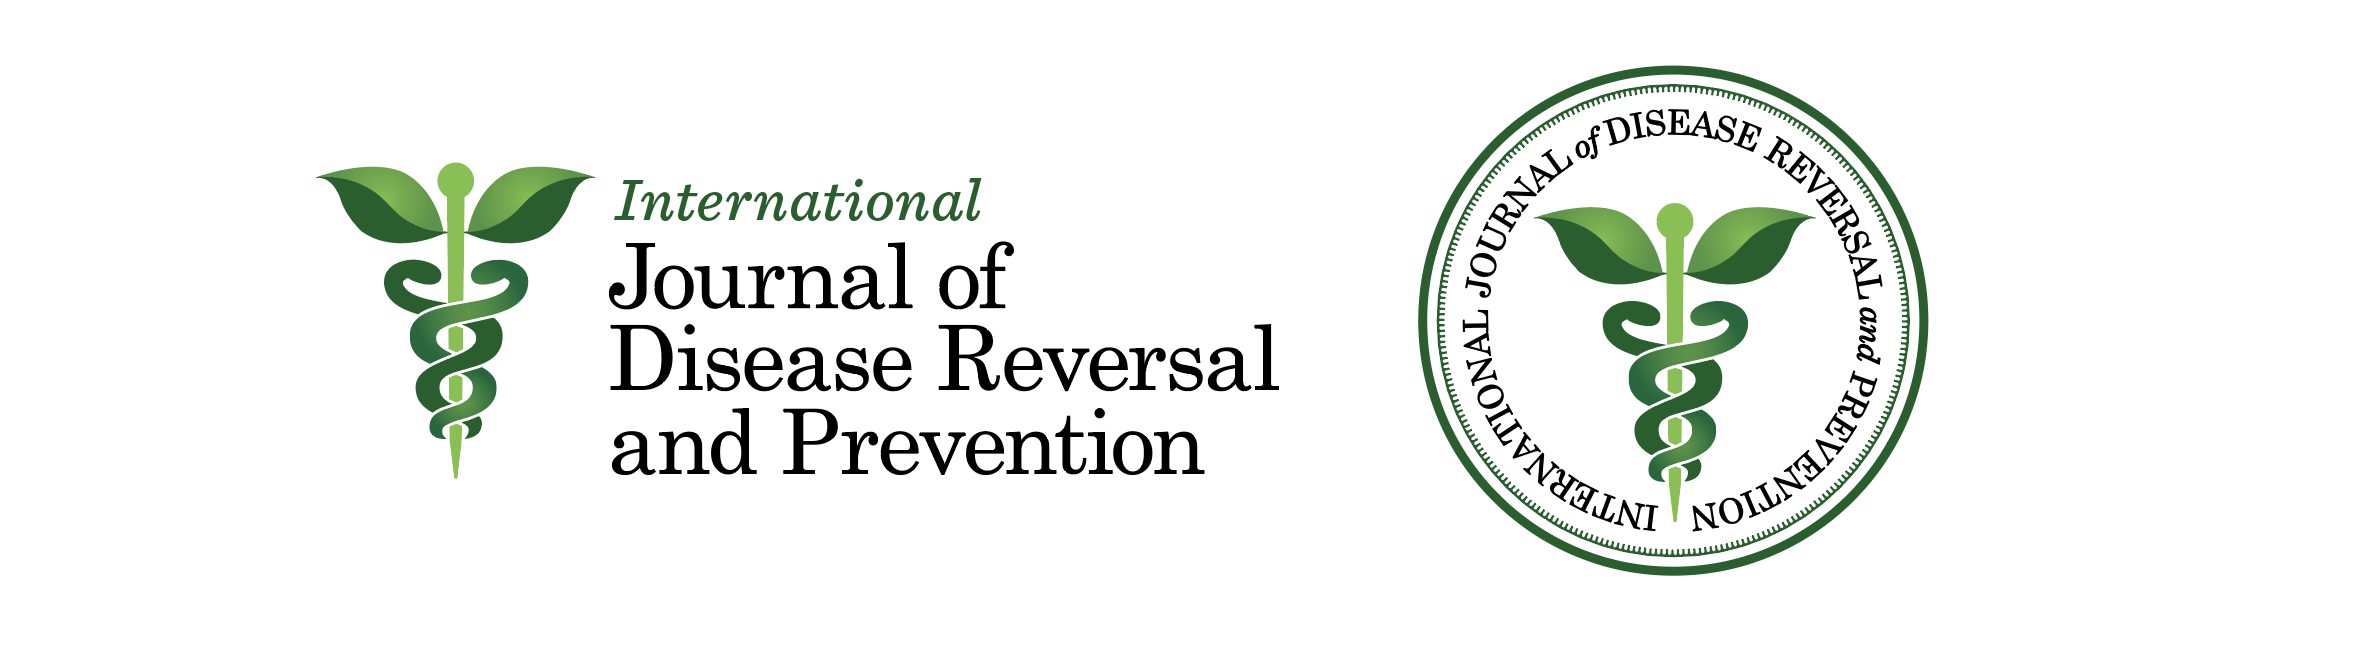 International Journal of Disease Reversal and Prevention — Enrich